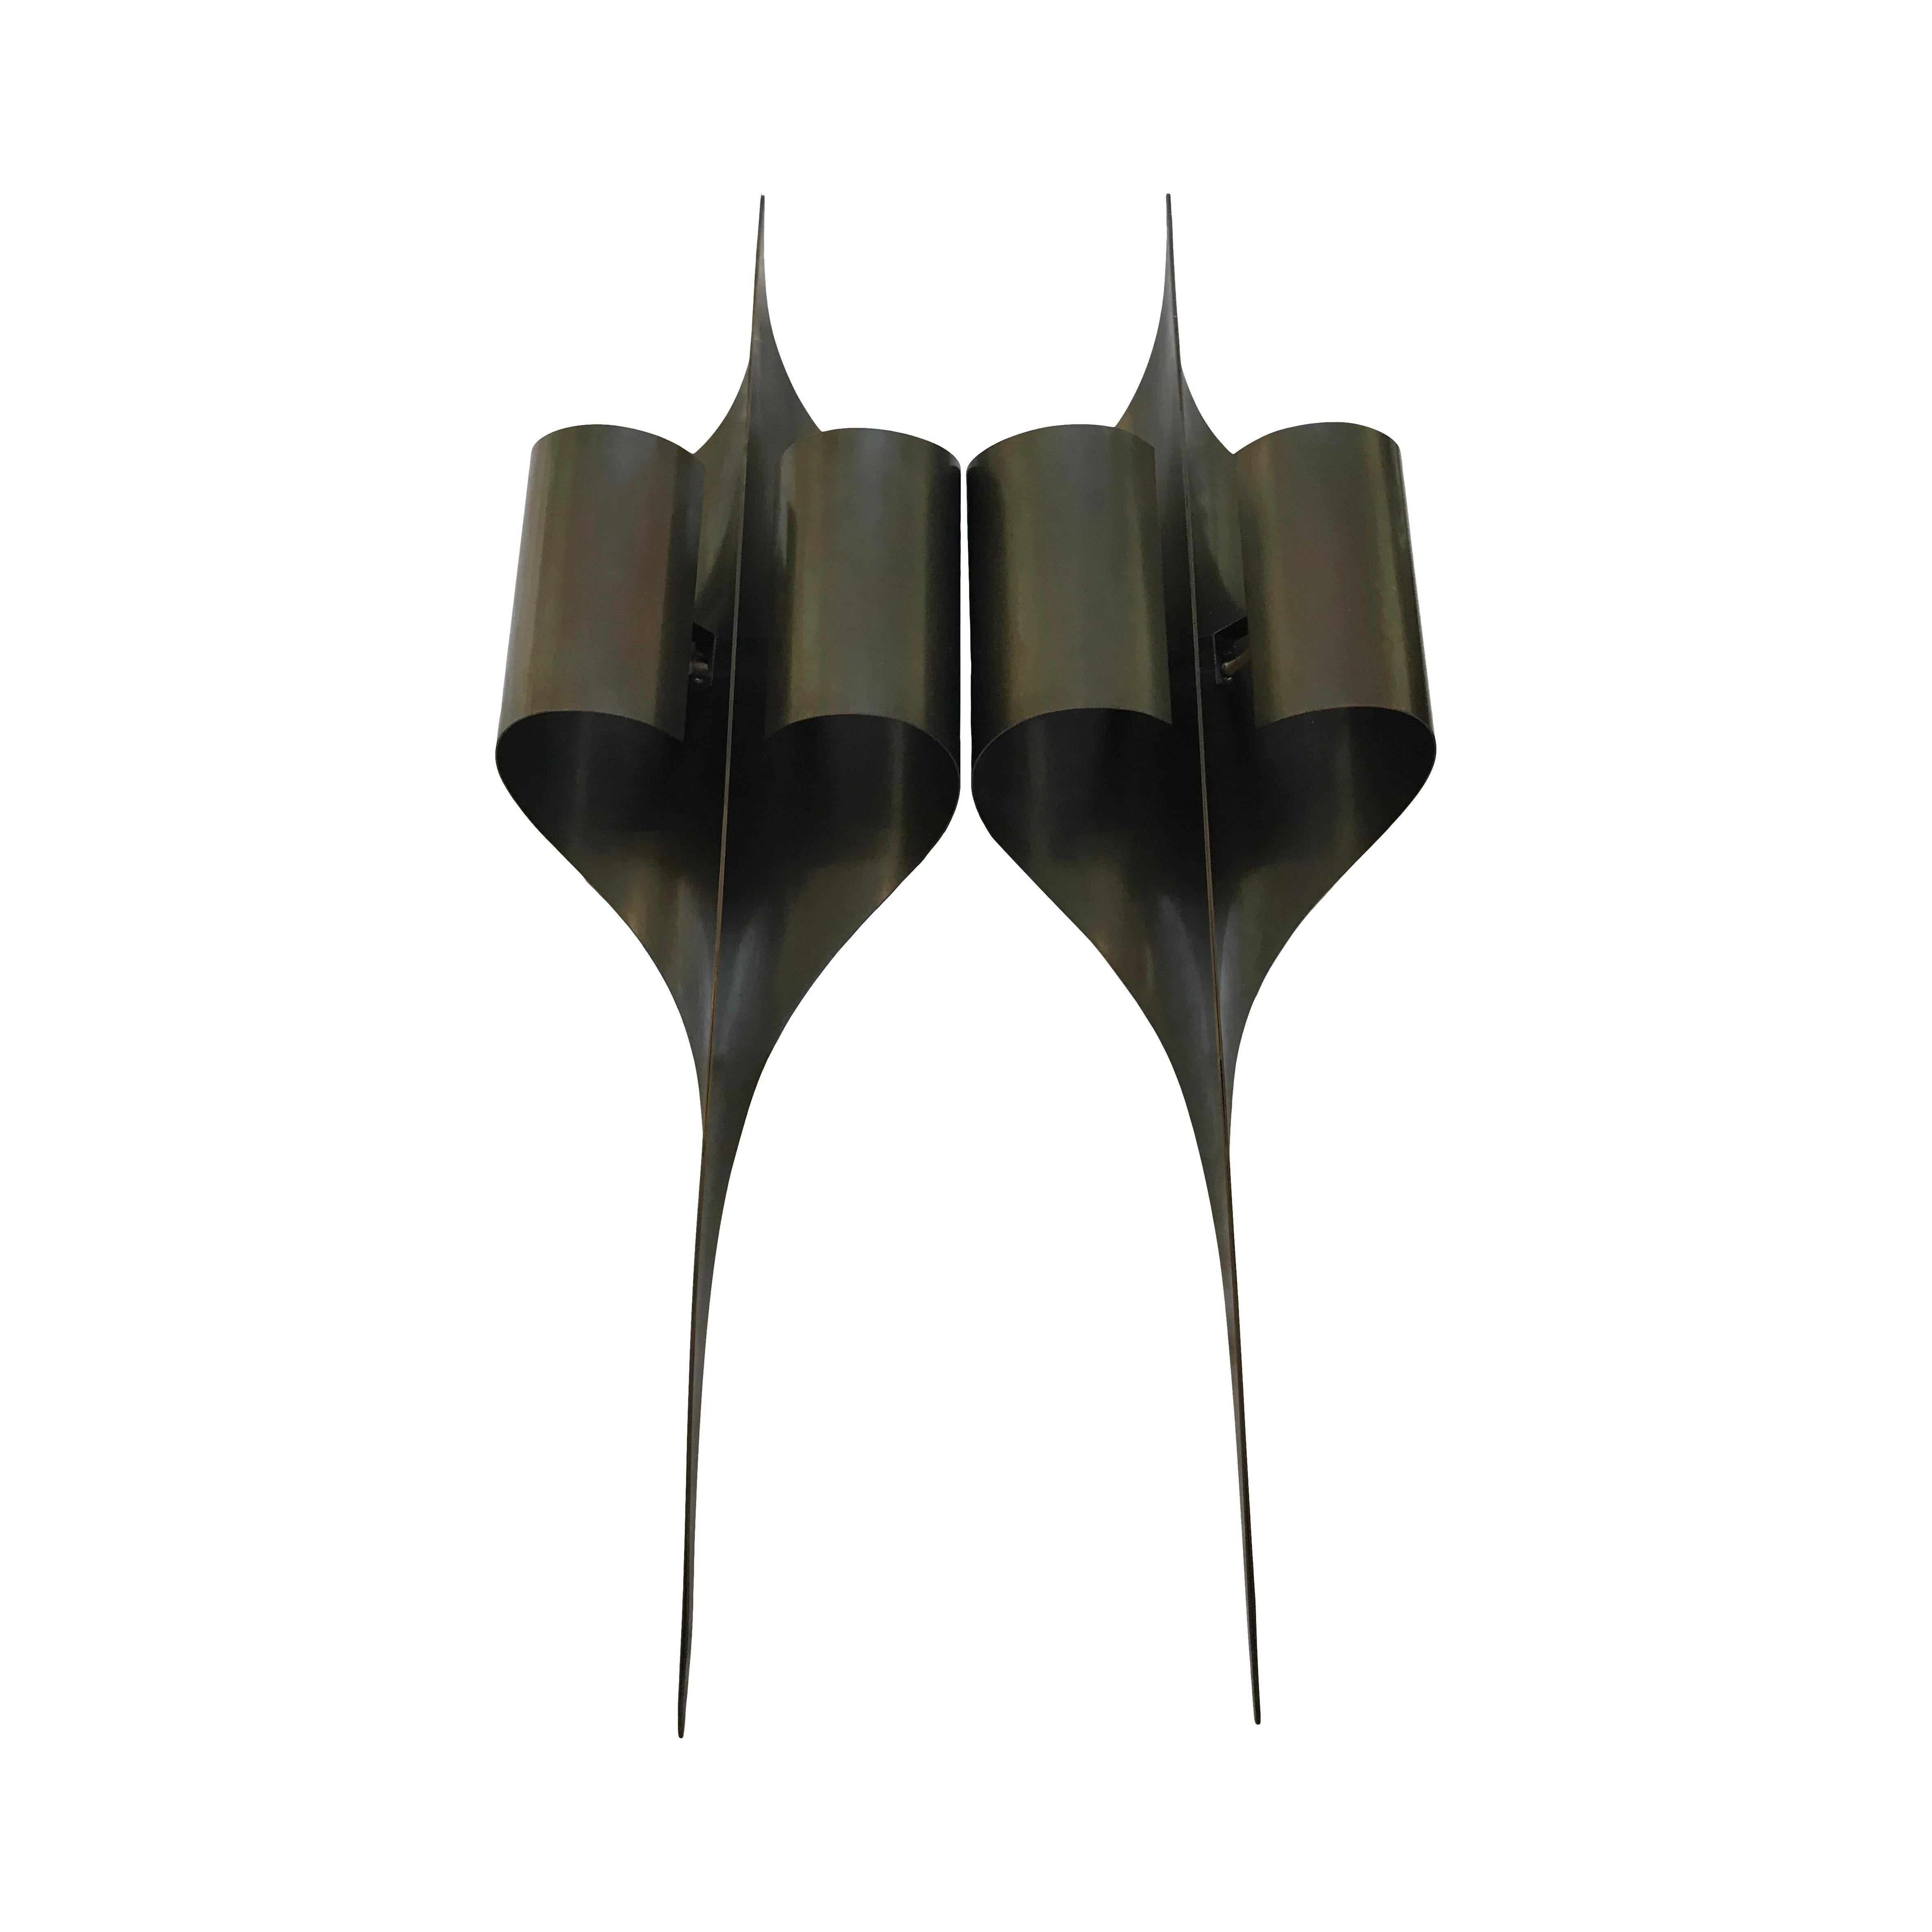 These stunning wall sconces by Maison Charles were made in this century but to the exact original design by Jacques Charles in the late 1960s and early 1970s.
Part of the renowned extensive Inox collection which was all originally made of curved